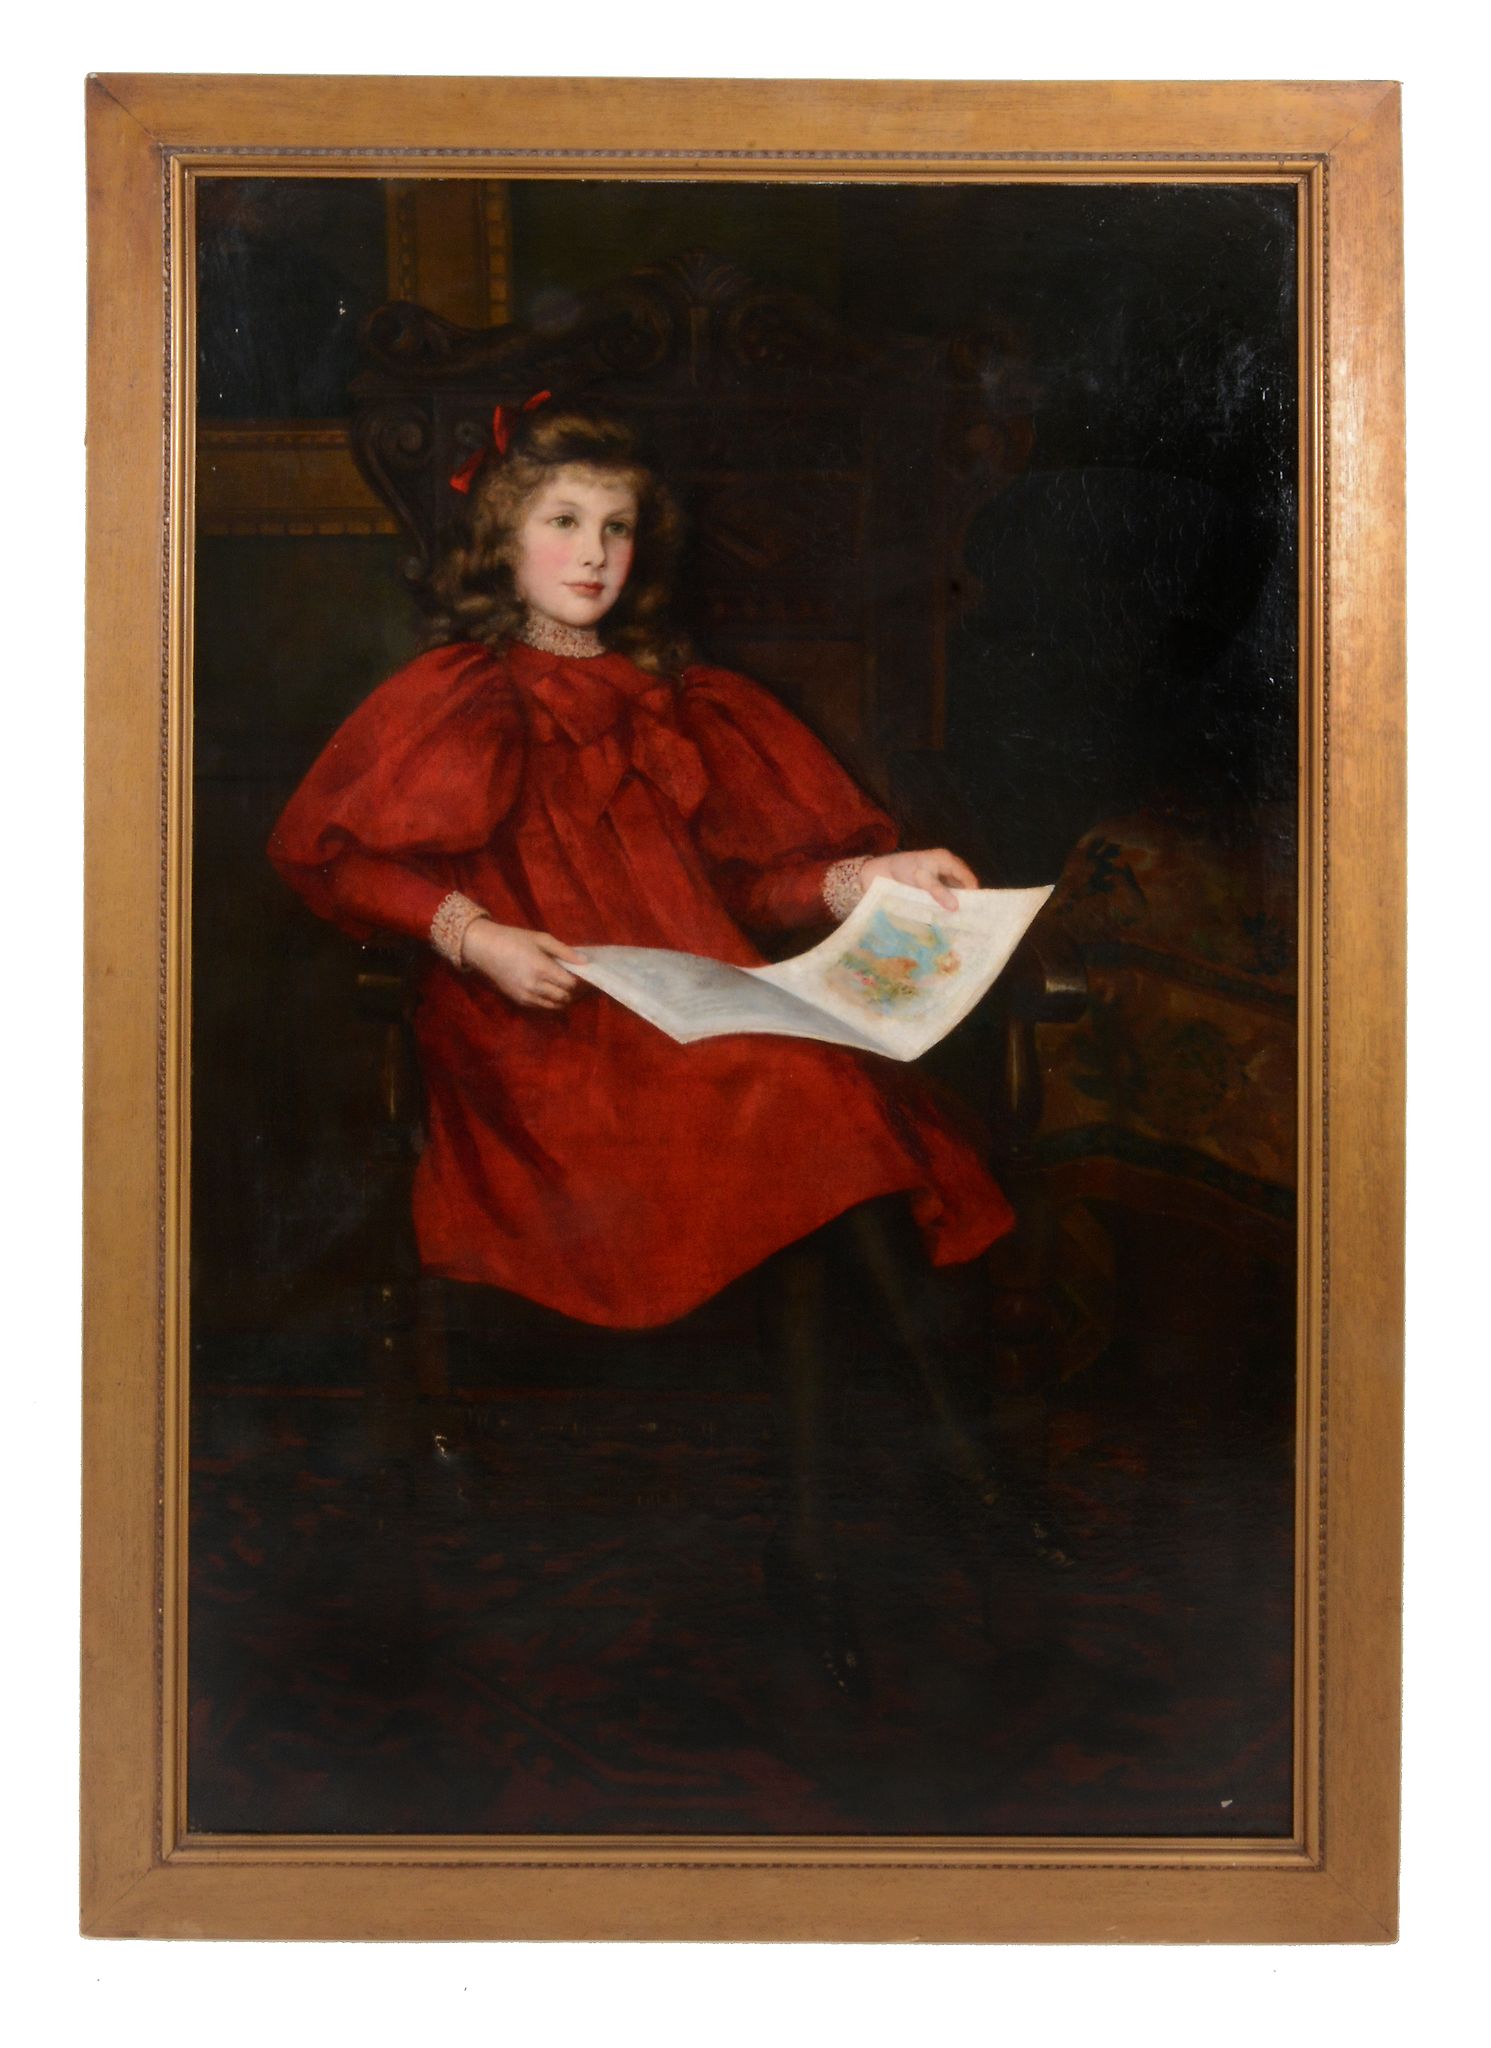 Emily M. Merrick (fl. 1878-1899) - 'In Wonderland', a portrait of Margery Merrick seated in a red - Image 2 of 4